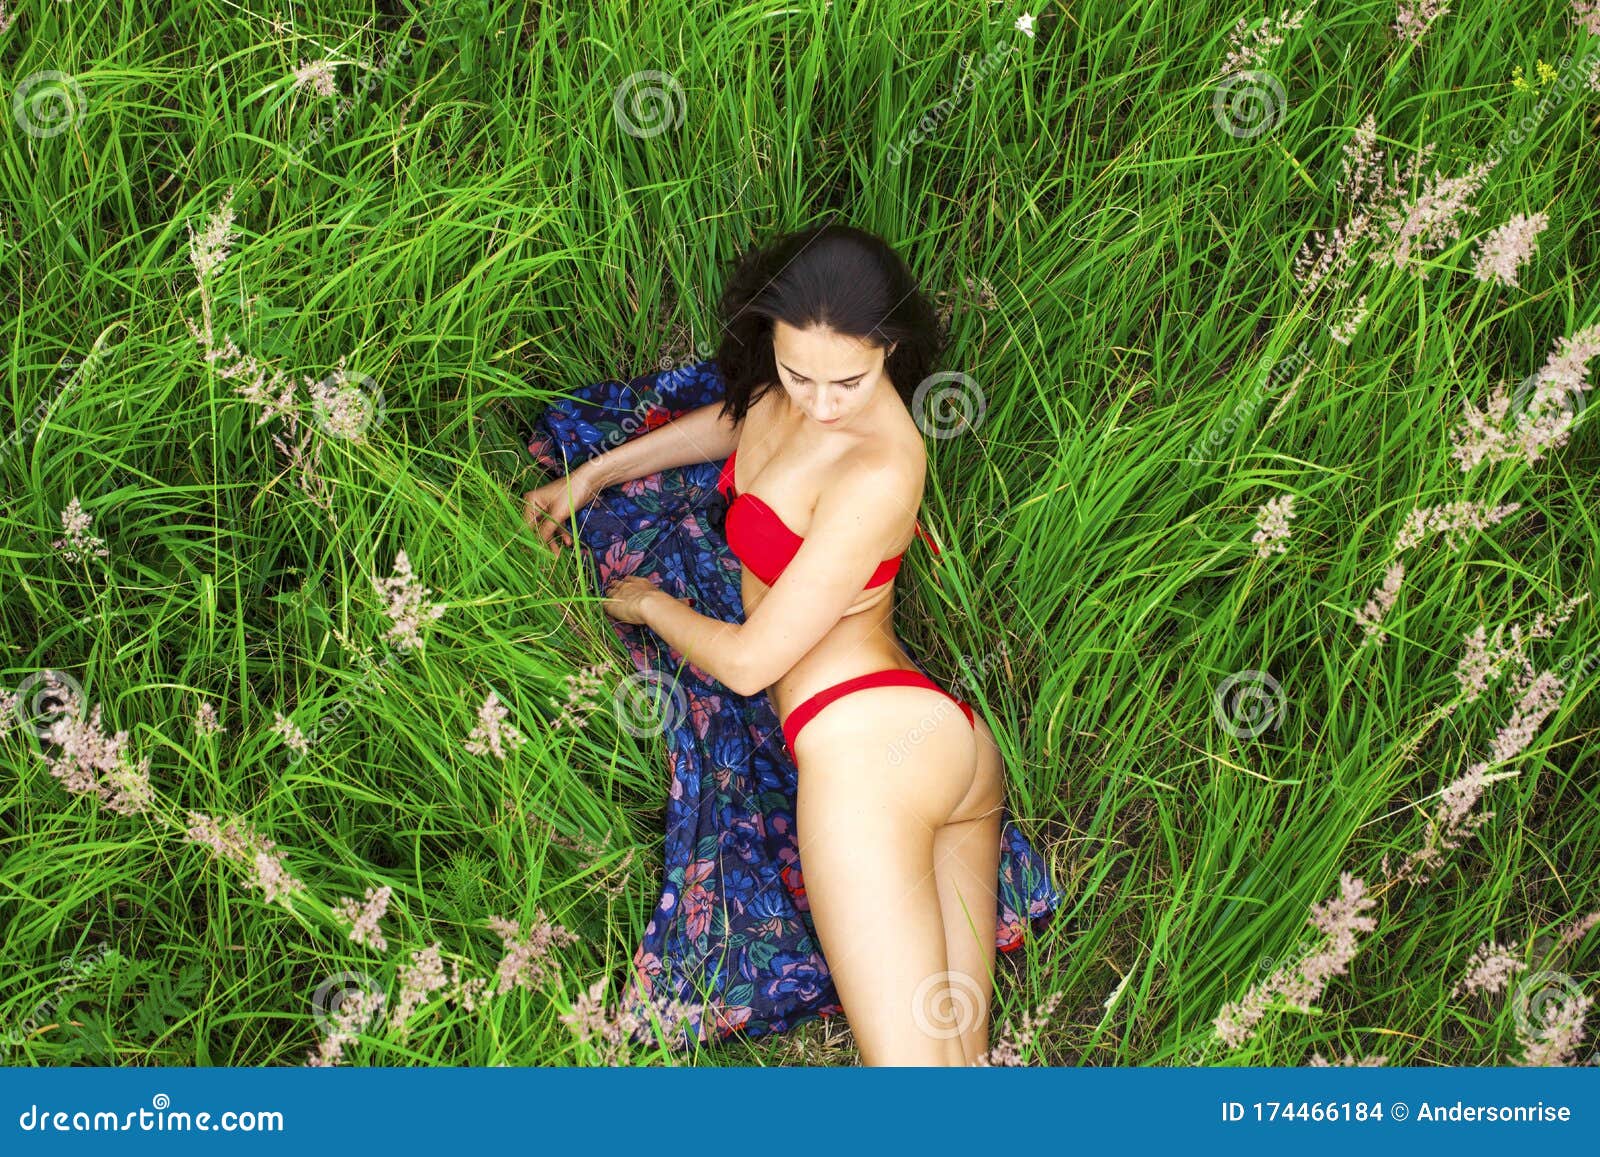 Erotic woman in grass wallpapers